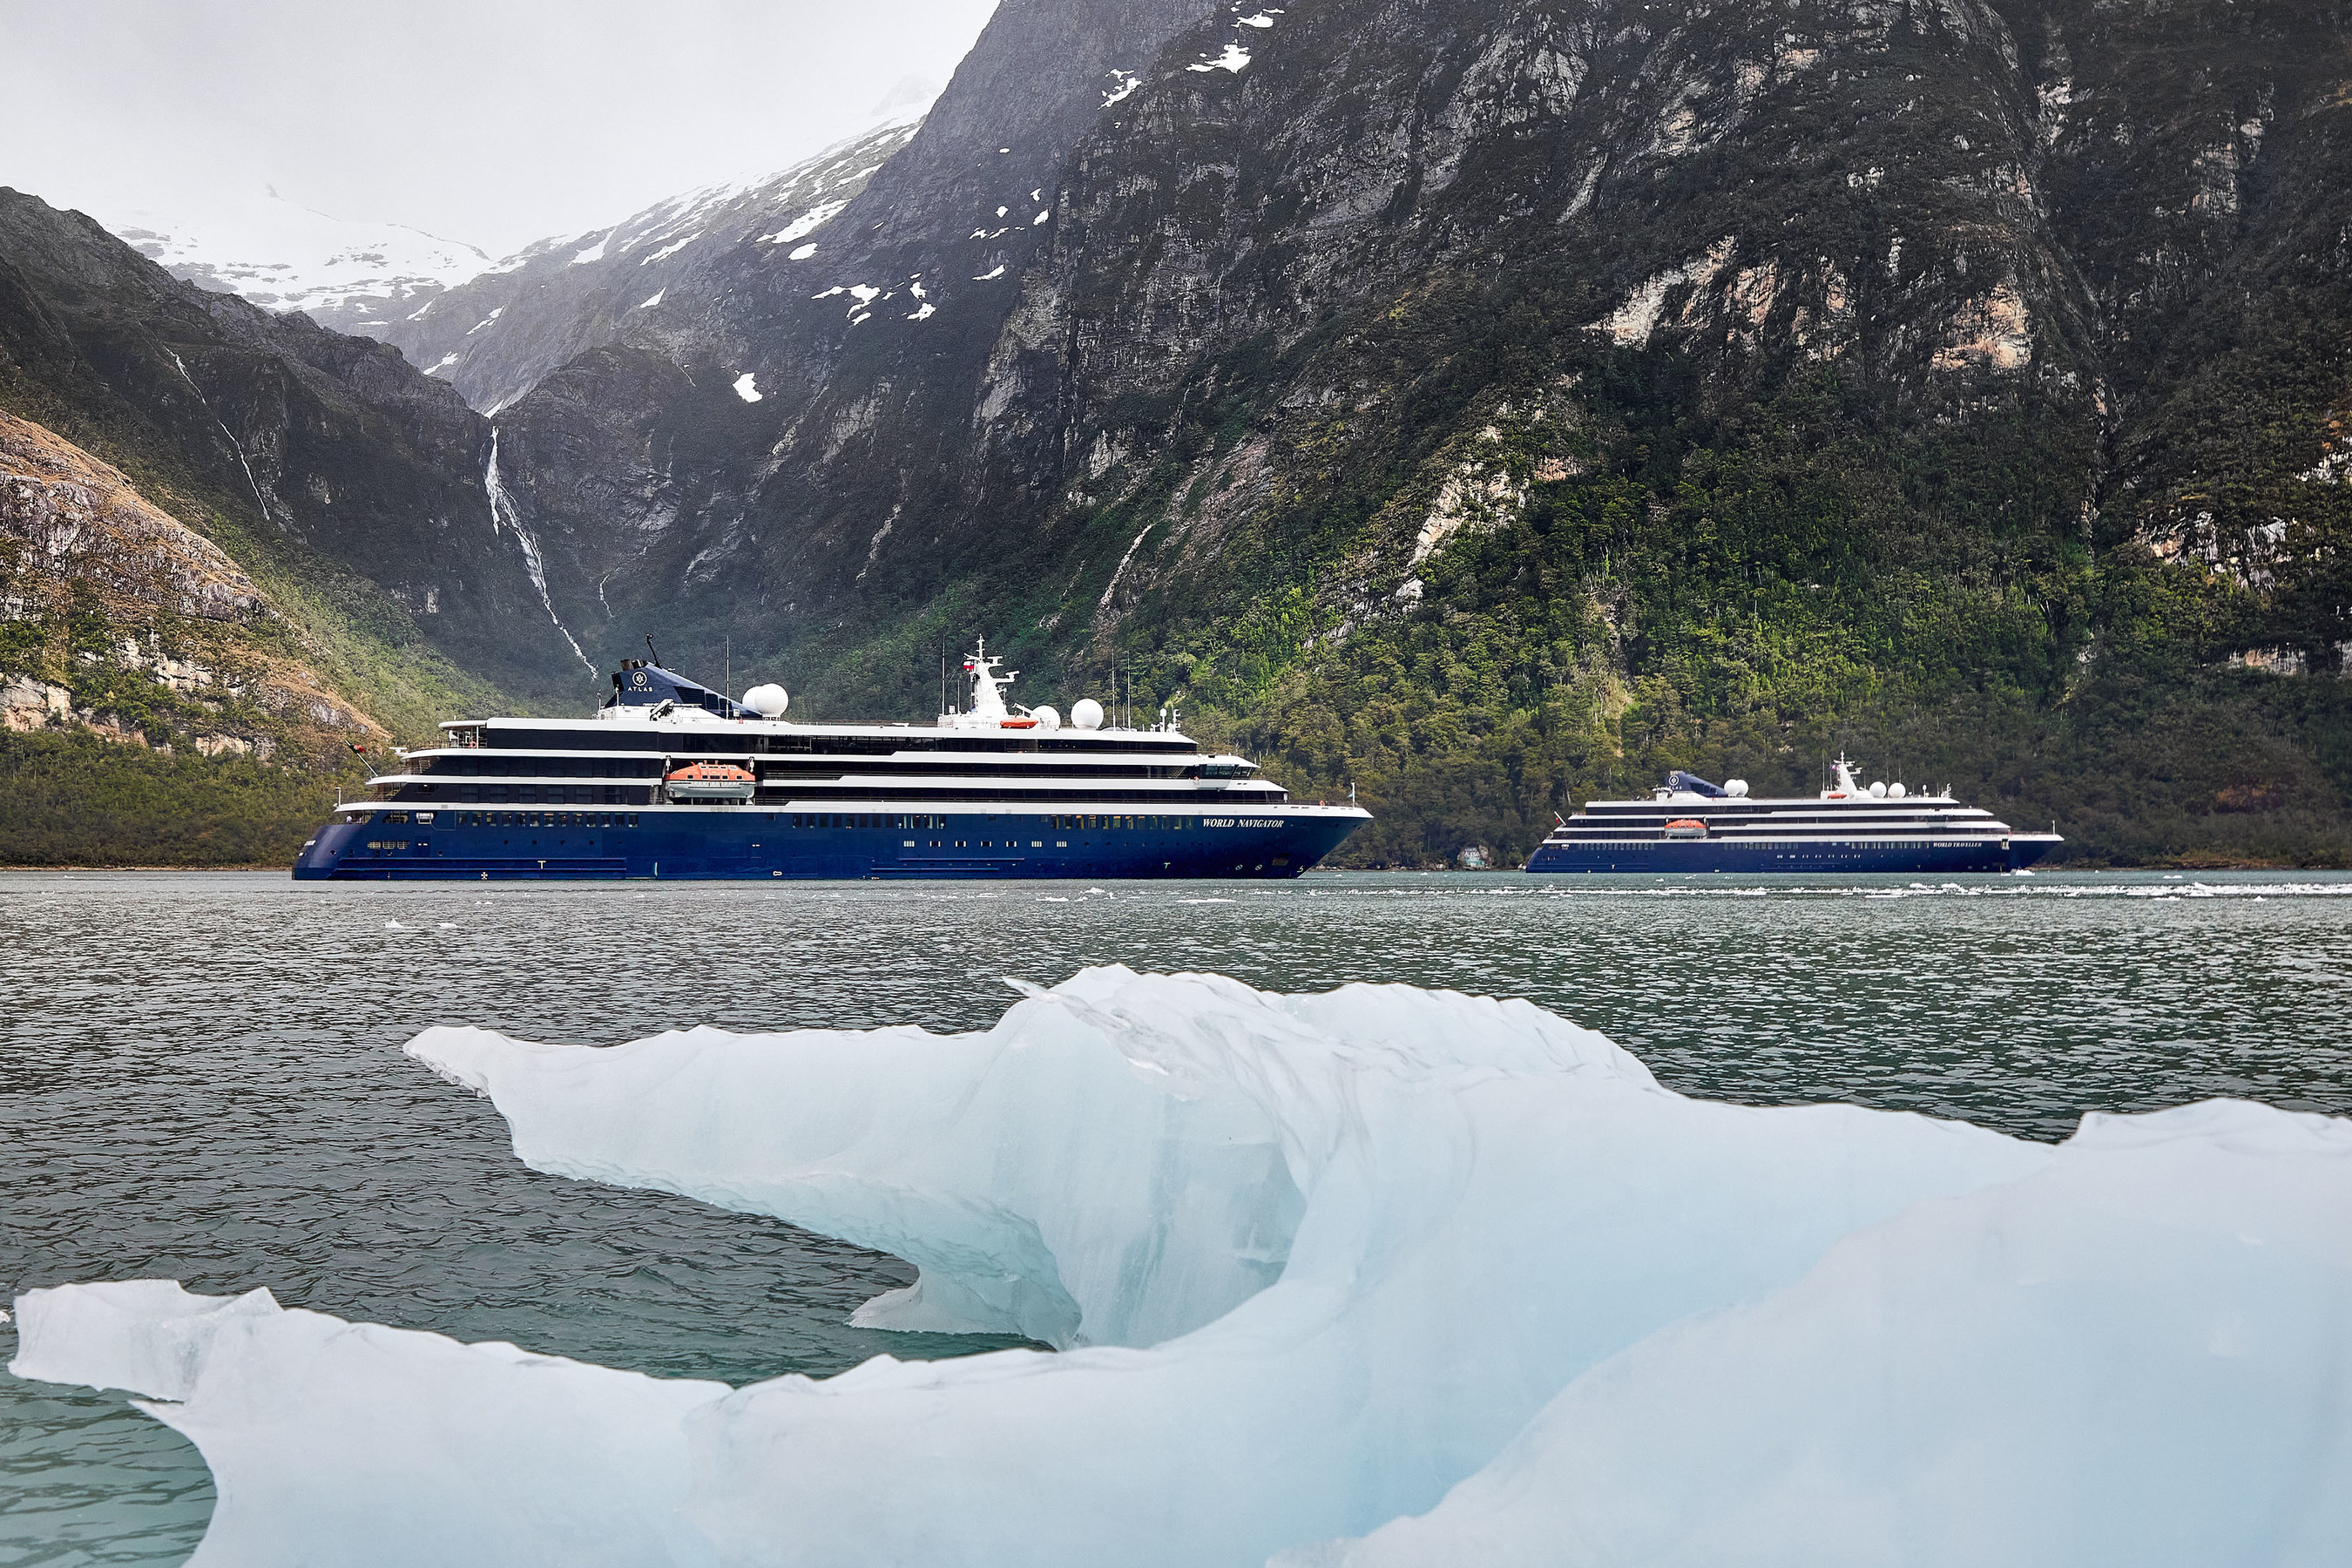 World Navigator and World Traveller, Atlas Ocean Voyages’ yacht-style sister ships, were both christened in Chilean Patagonia this weekend (Image at LateCruiseNews.com - November 2022)